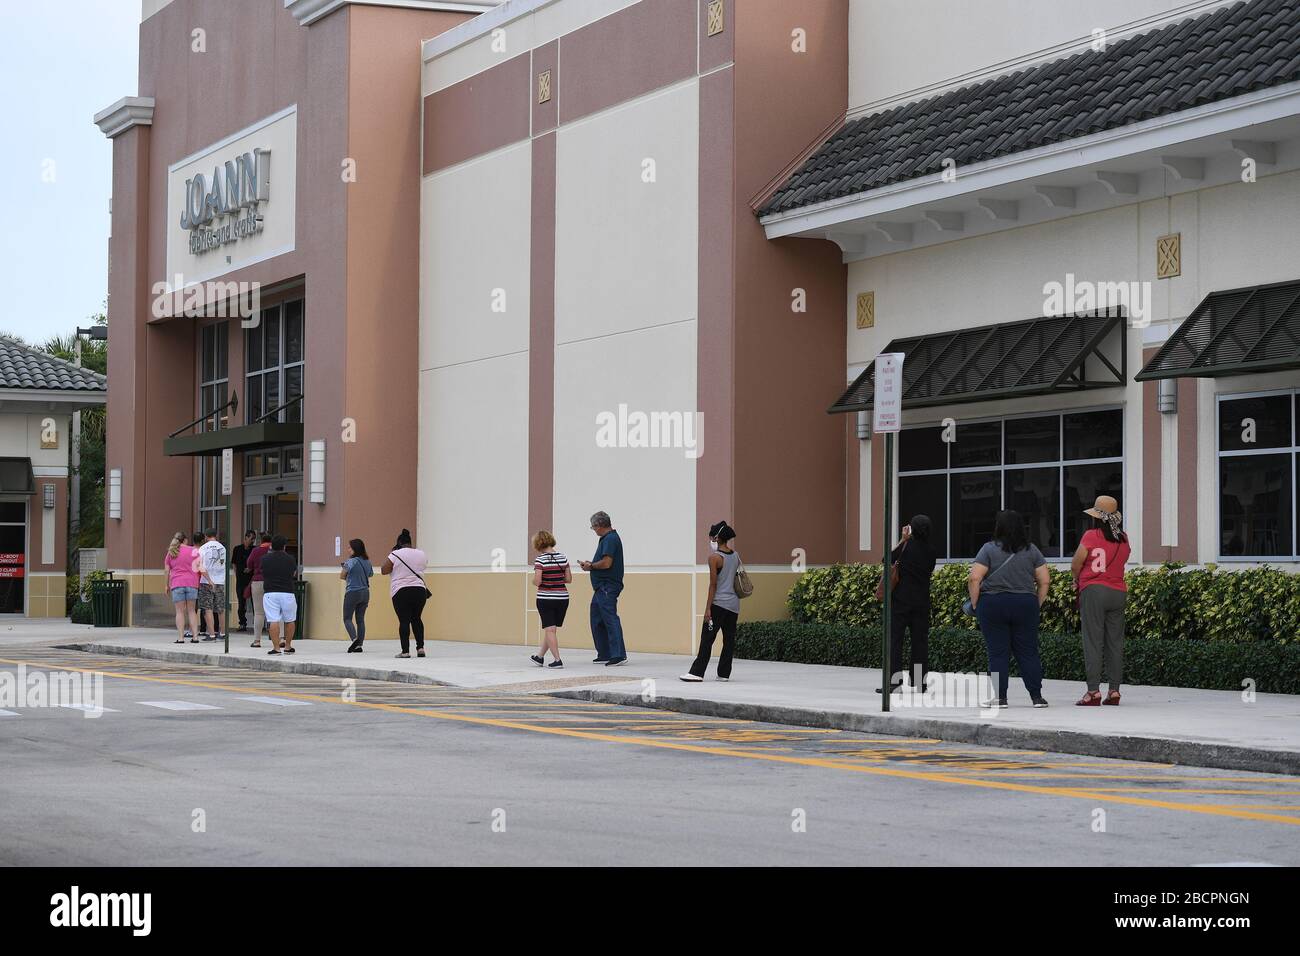 COCONUT CREEK, FL - APRIL 04: Shoppers line up outside Joann Fabrics and Crafts to get material to make masks due to the Coronavirus (COVID-19) pandemic on April 4, 2020 in Coconut Creek, Florida. Credit: mpi04/MediaPunch Stock Photo